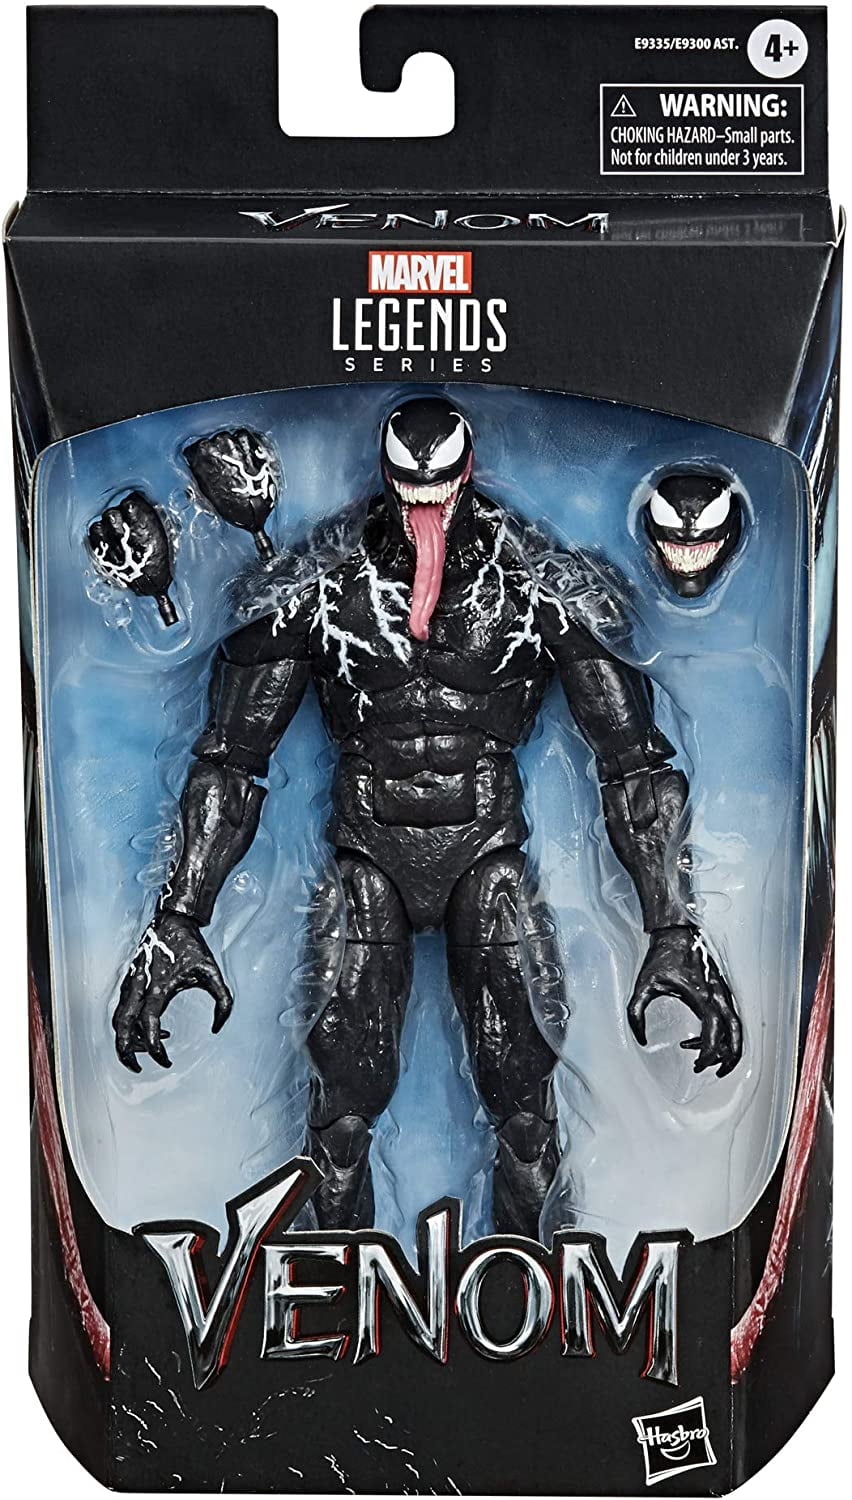 Spider-Man Marvel Legends Series 6-inch Symbiote Action Figure Toy 4 Alternate Hands Includes 4 Accessories 